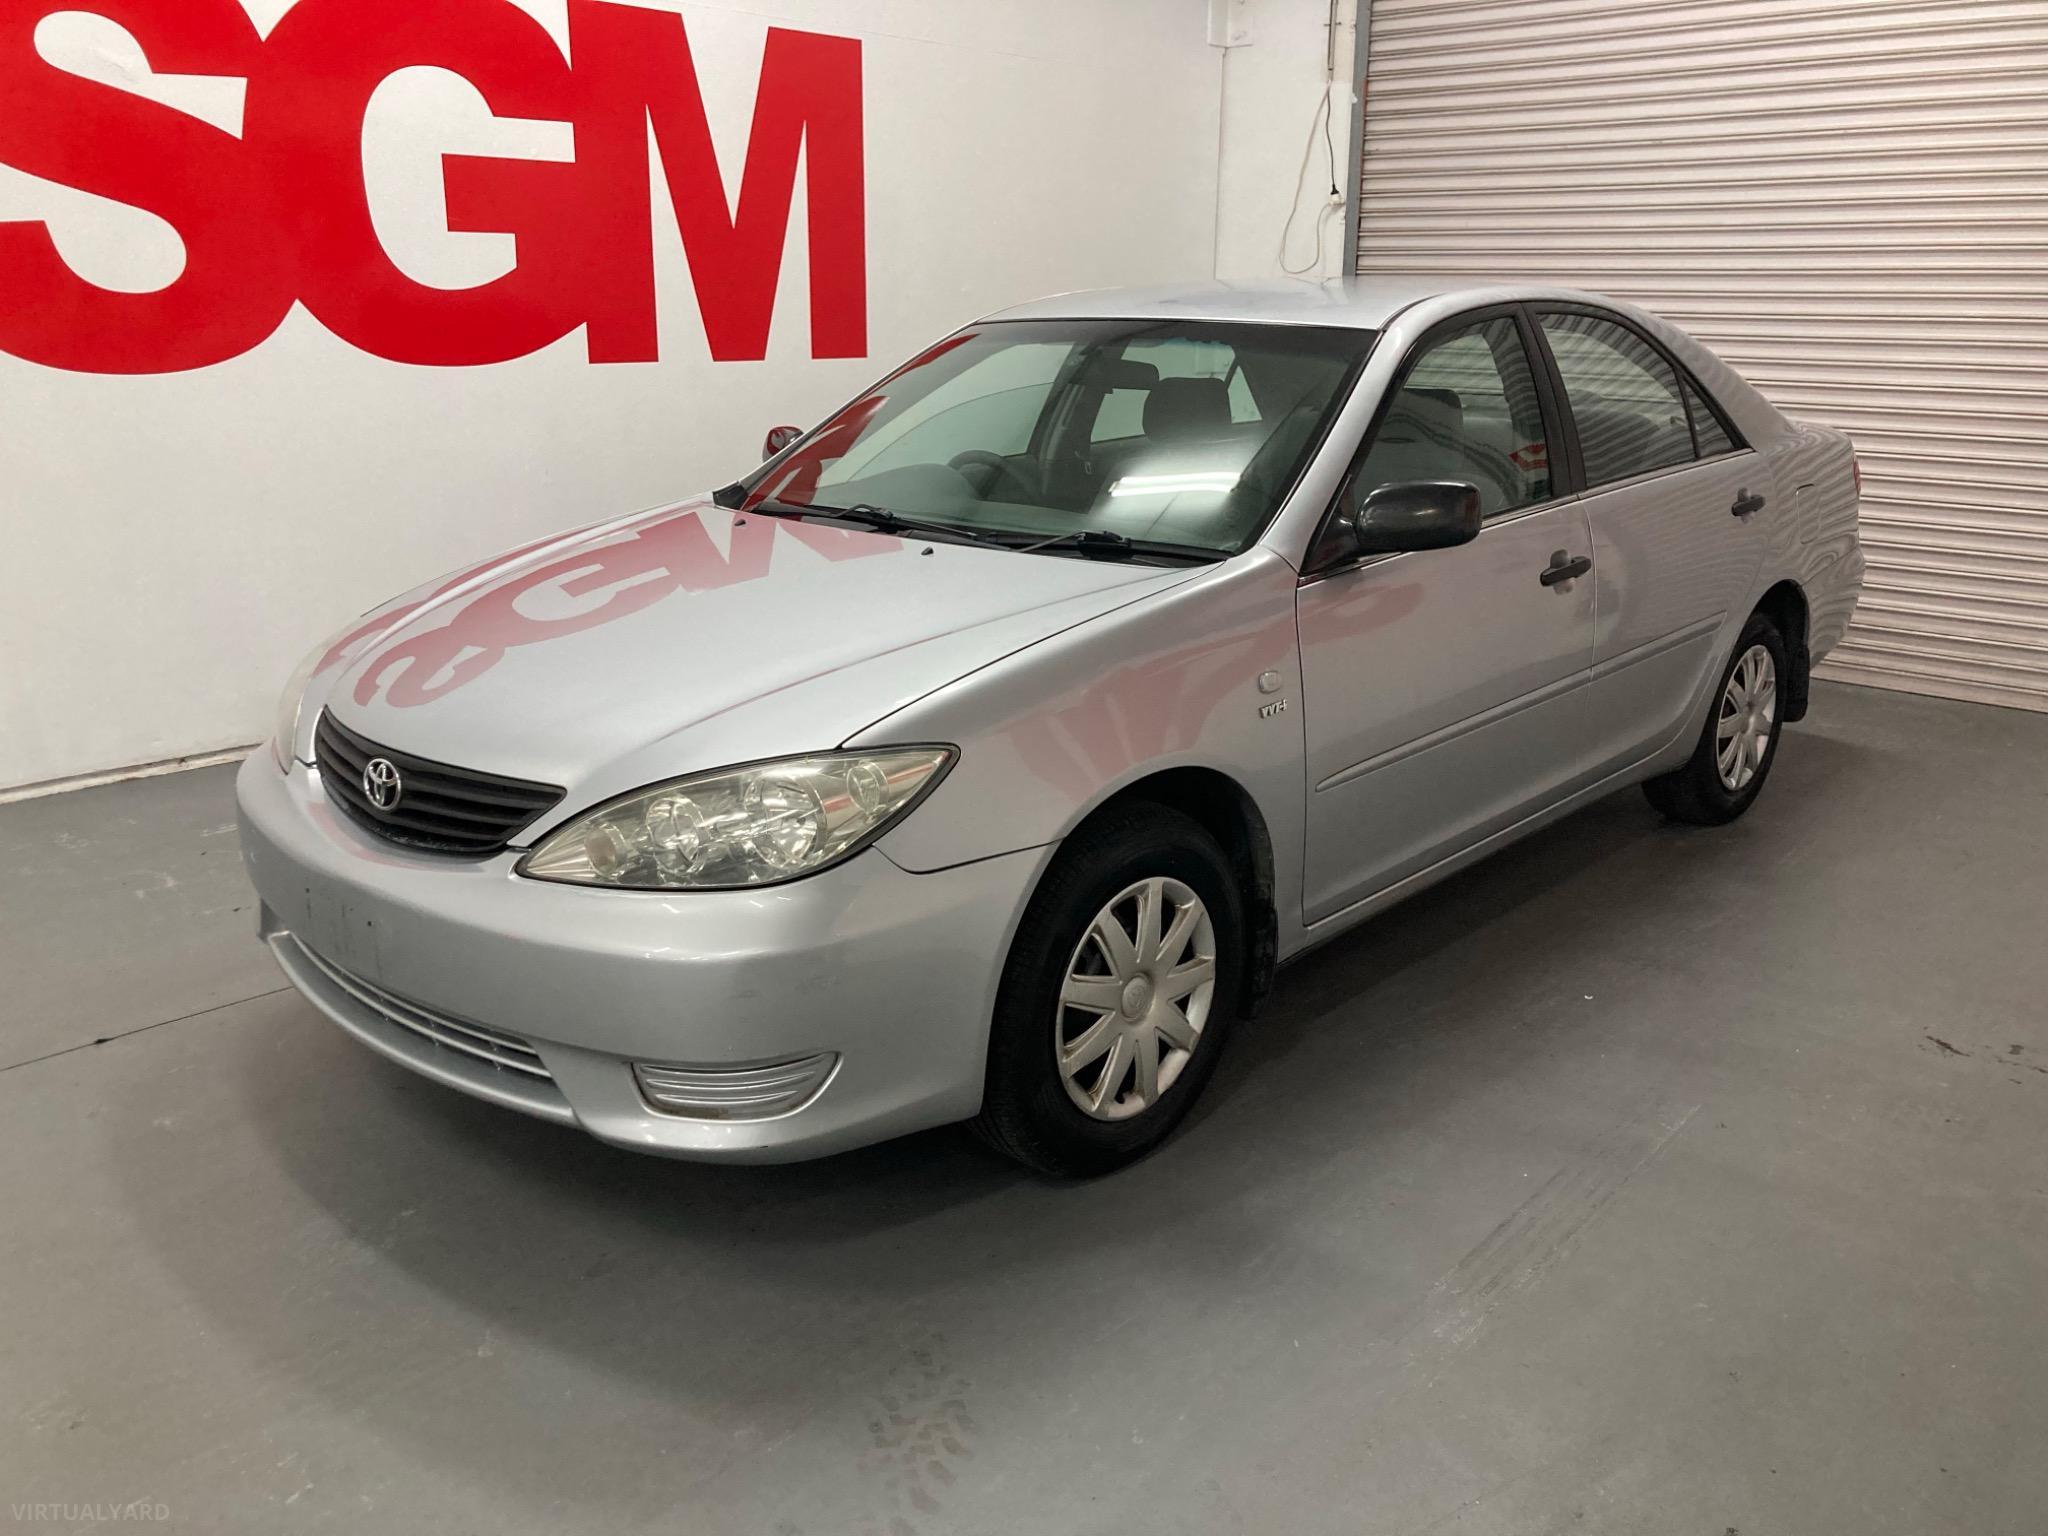 2005 Toyota Camry ACV36R Altise Sedan 4dr Auto 4sp 2.4i Picture 8